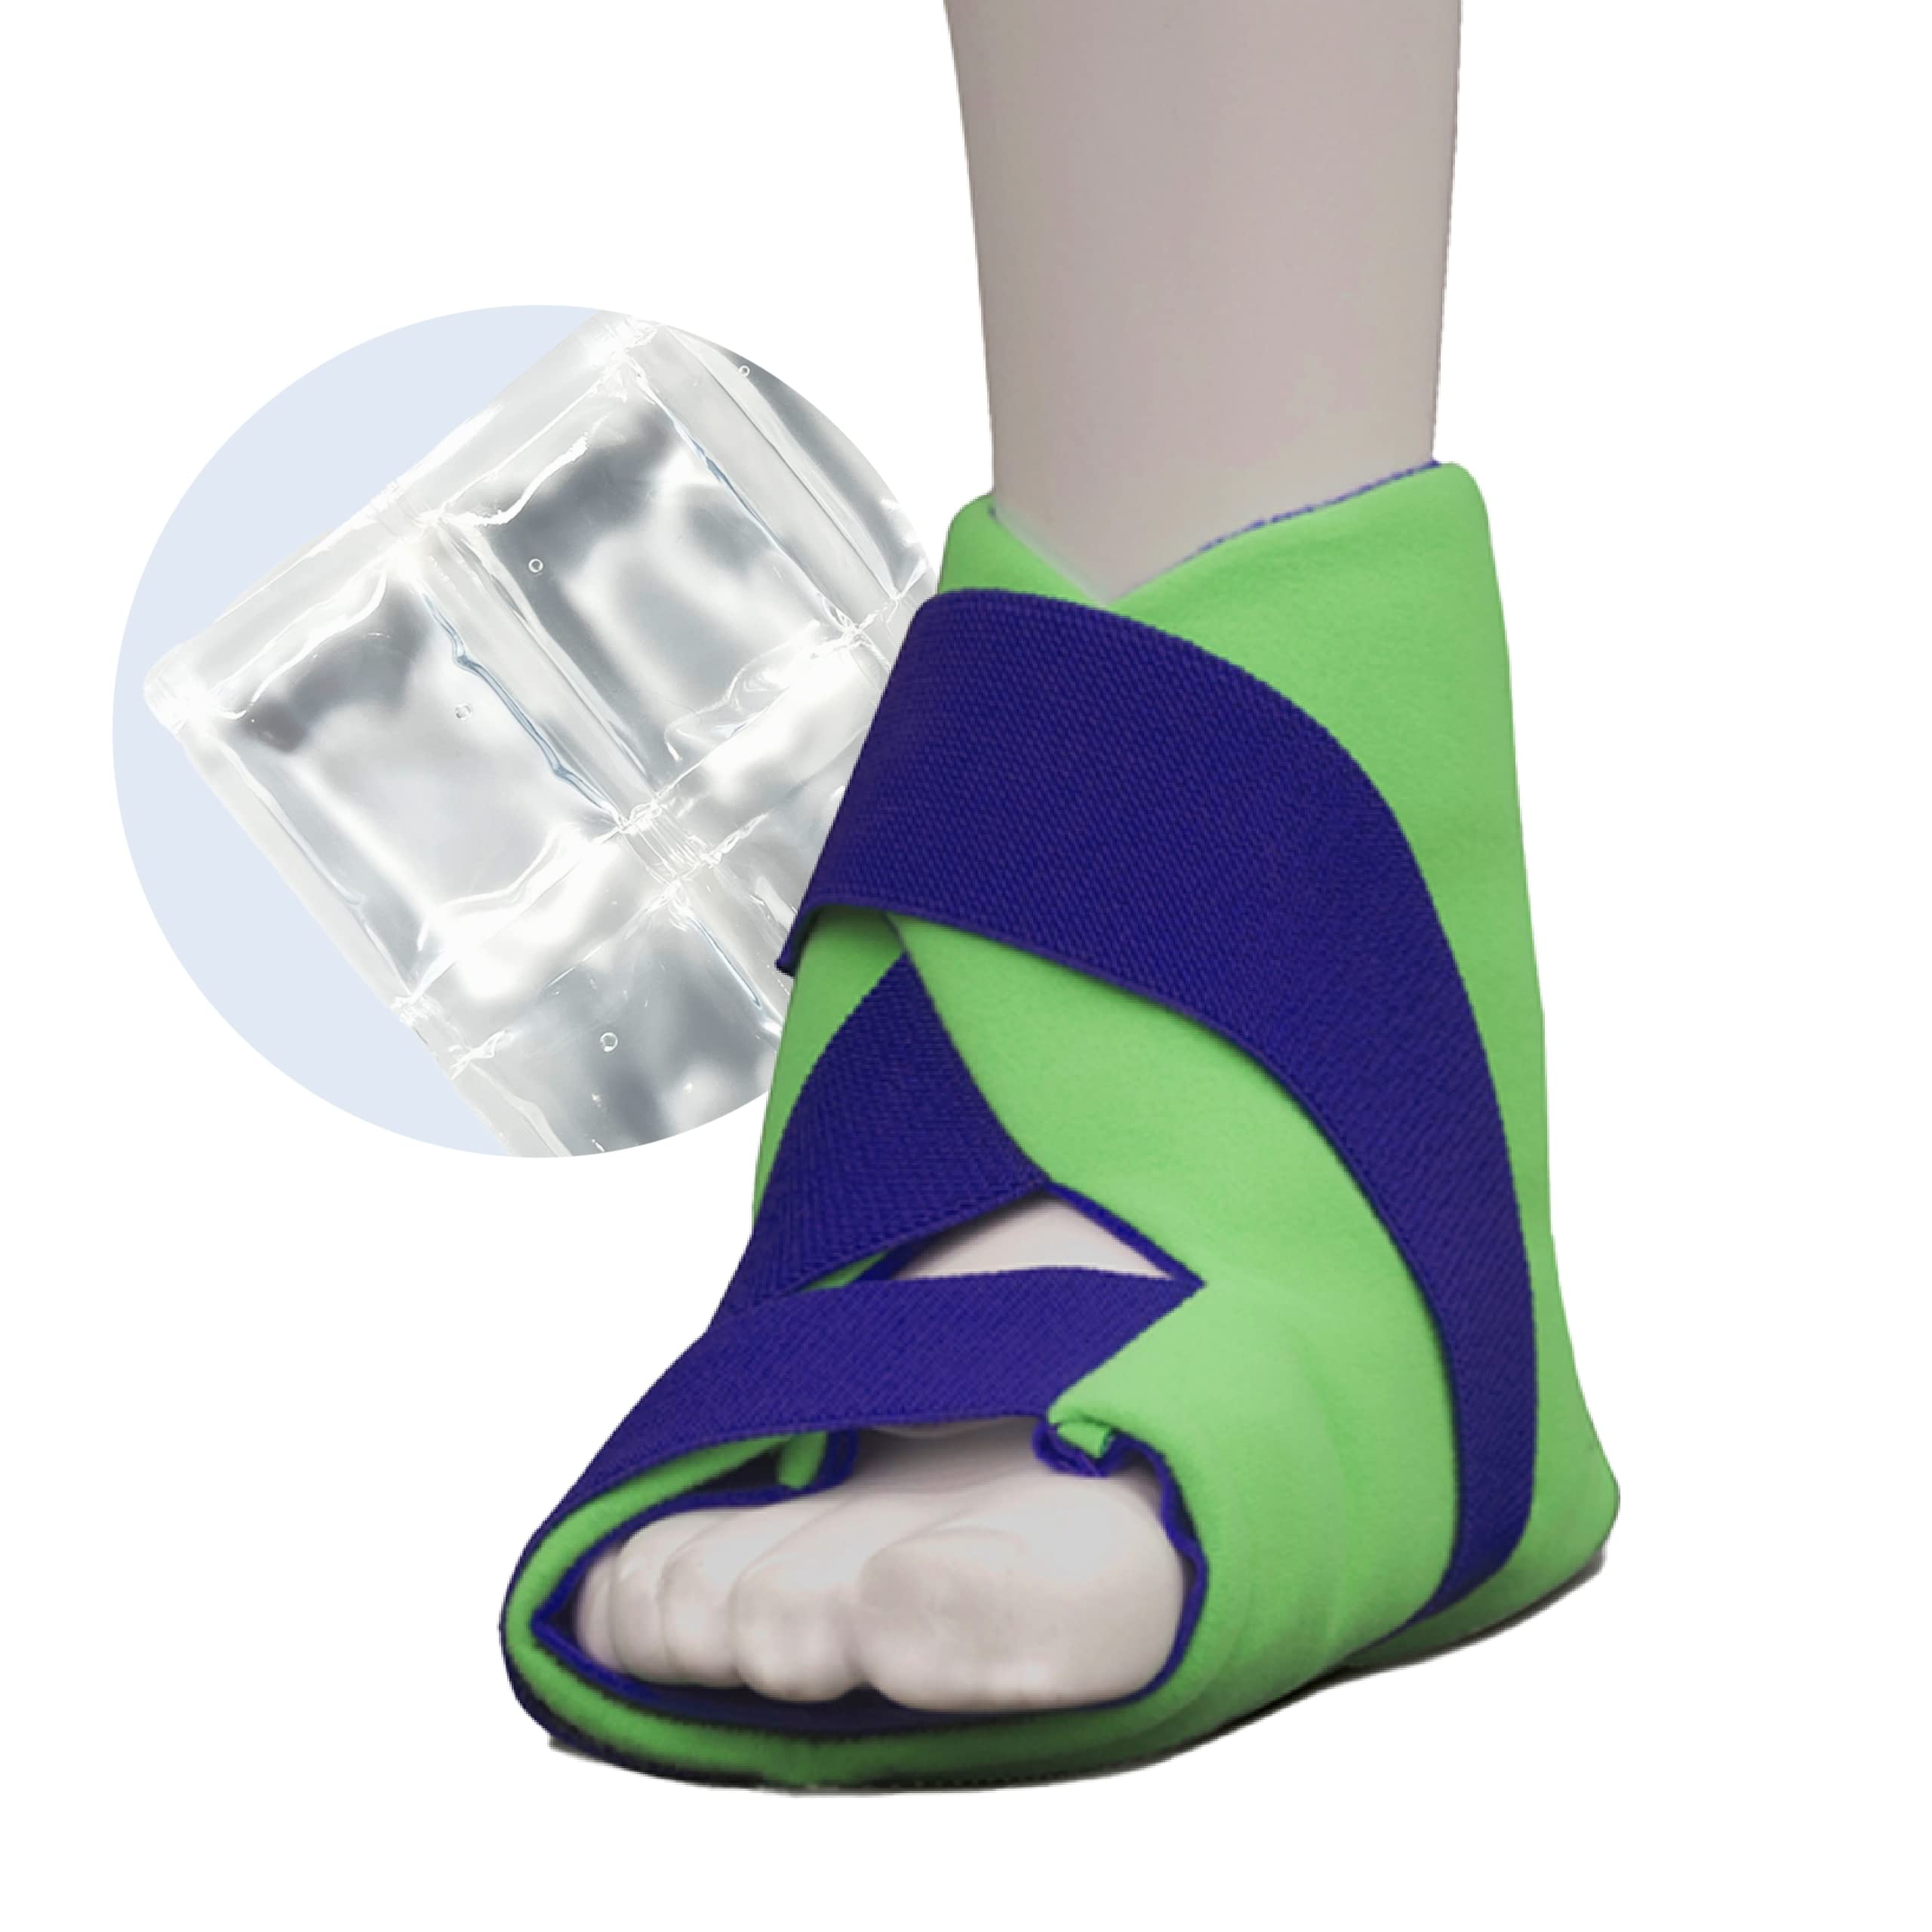 Polar Ice Cold Therapy Support Foot/Ankle